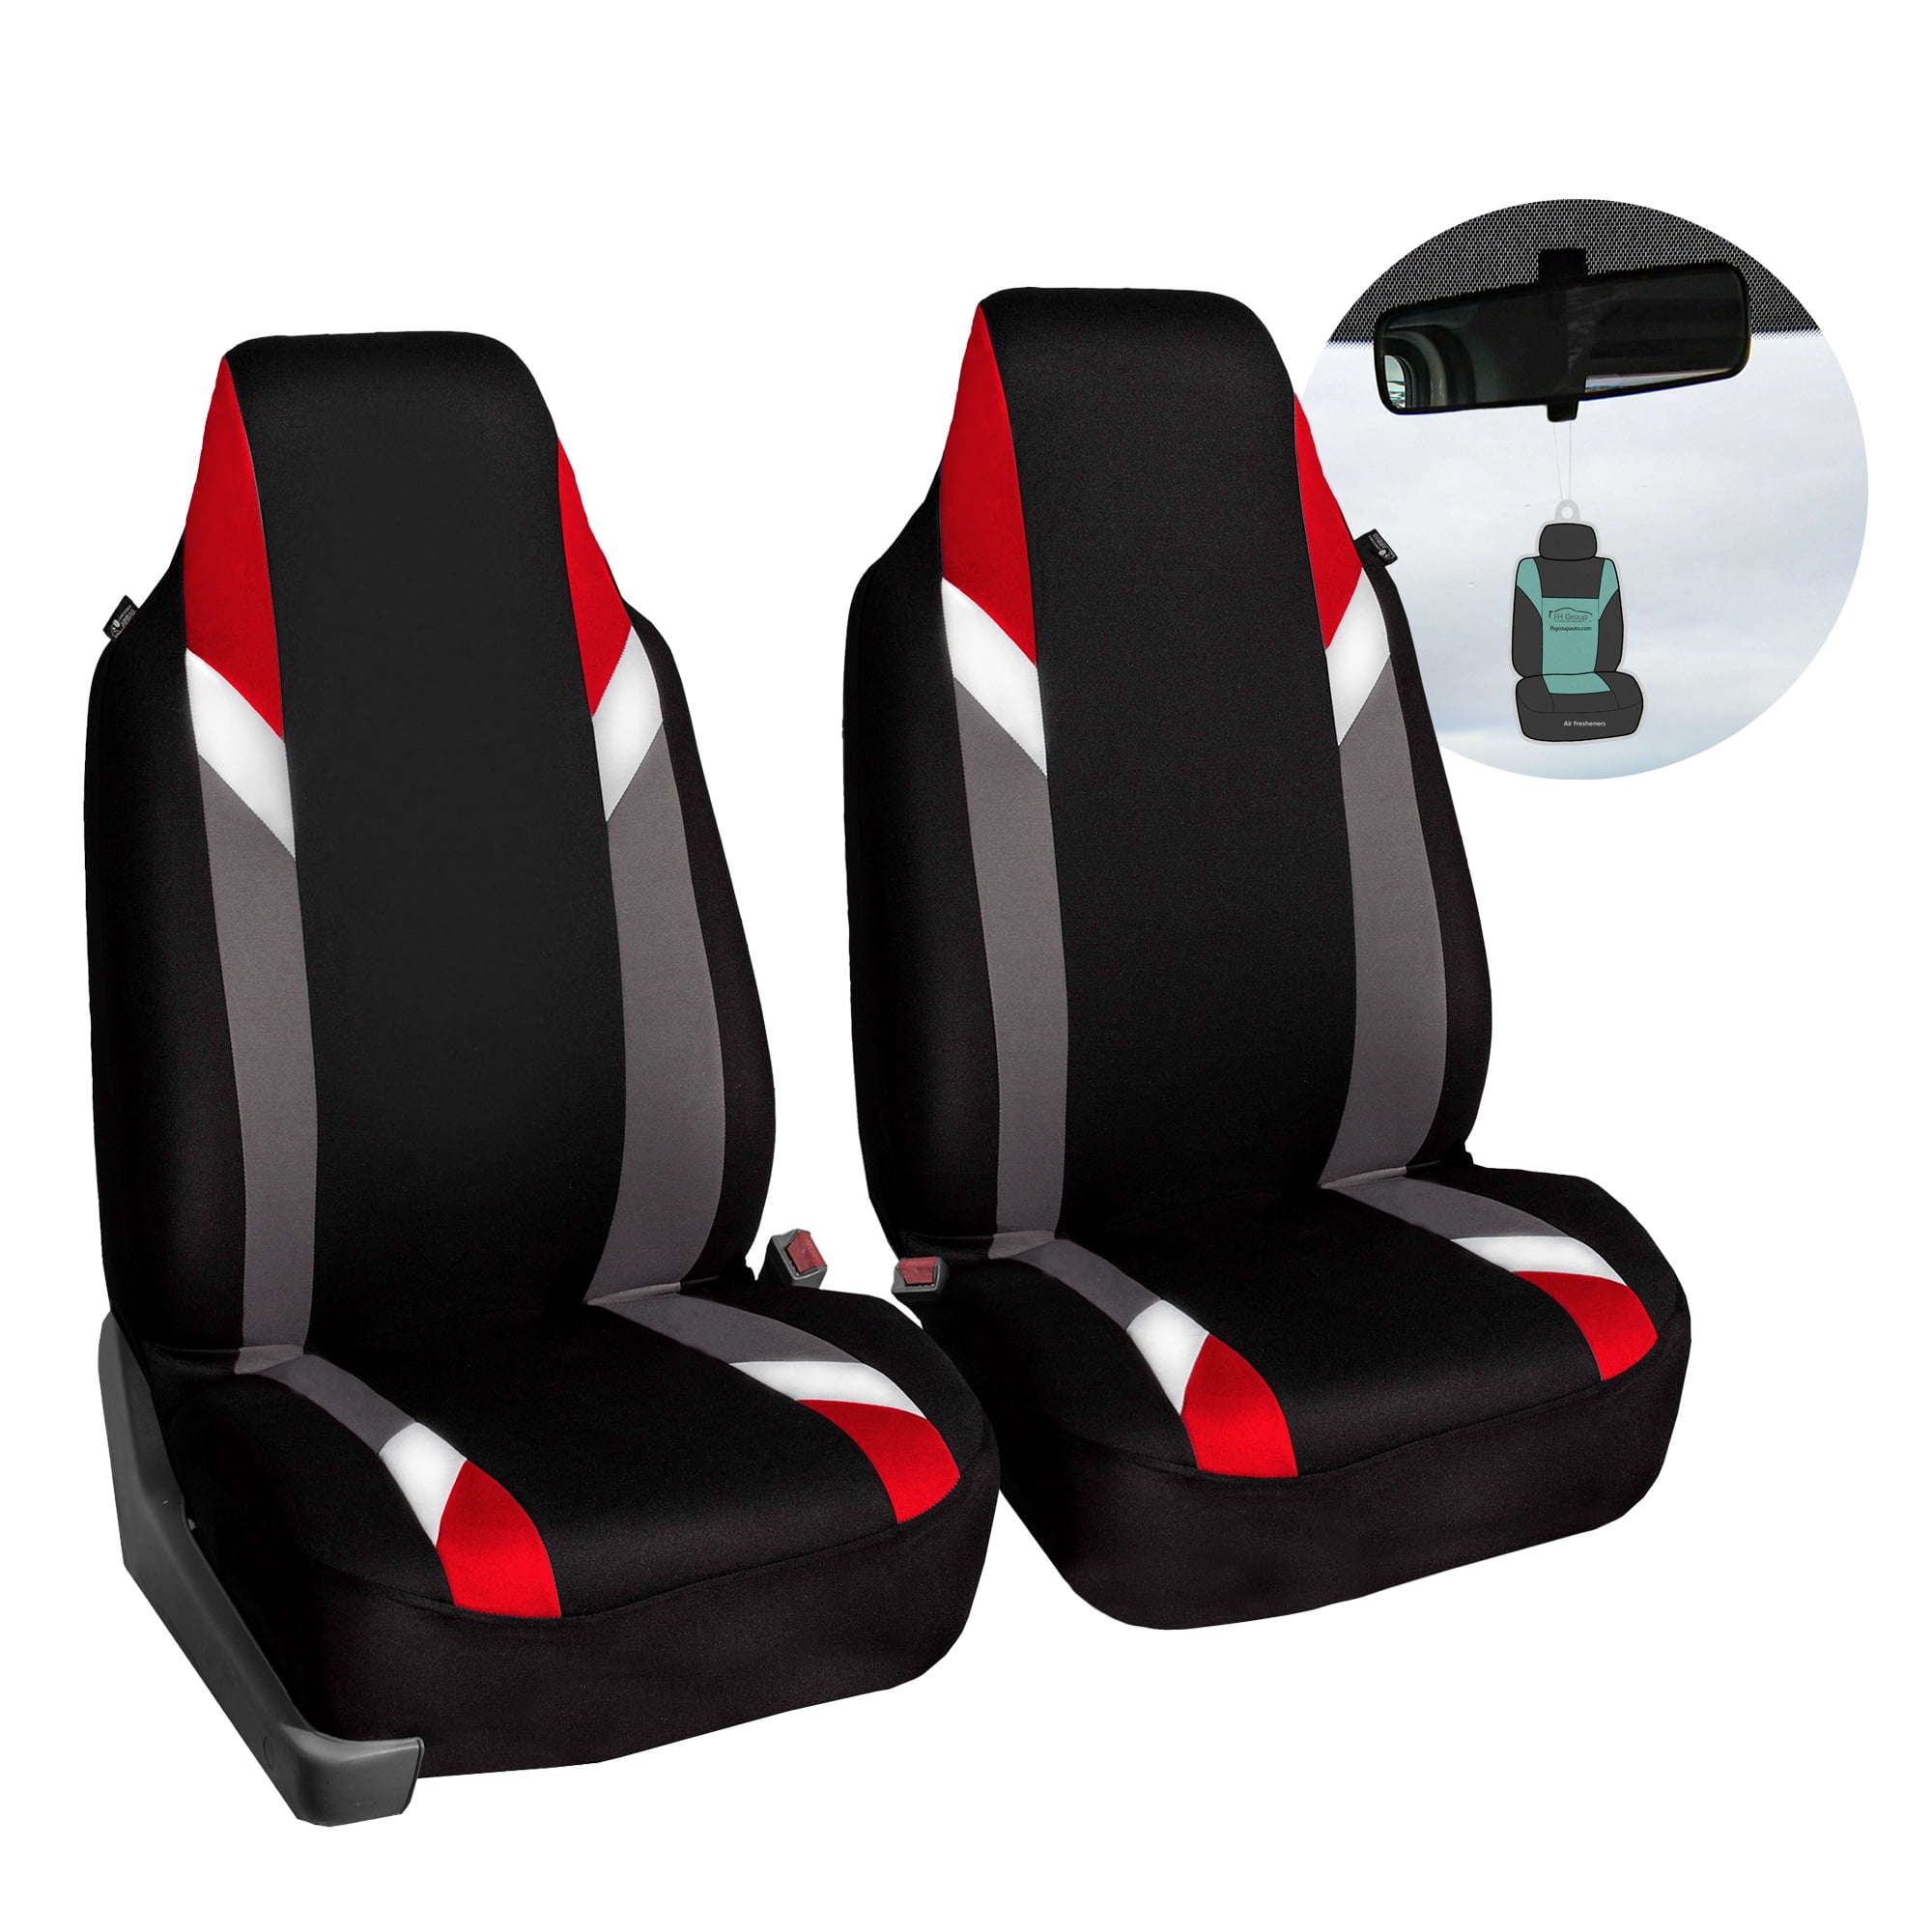 FH Group Supreme Modernistic Front Seat Covers with Bonus Air Freshener, Red